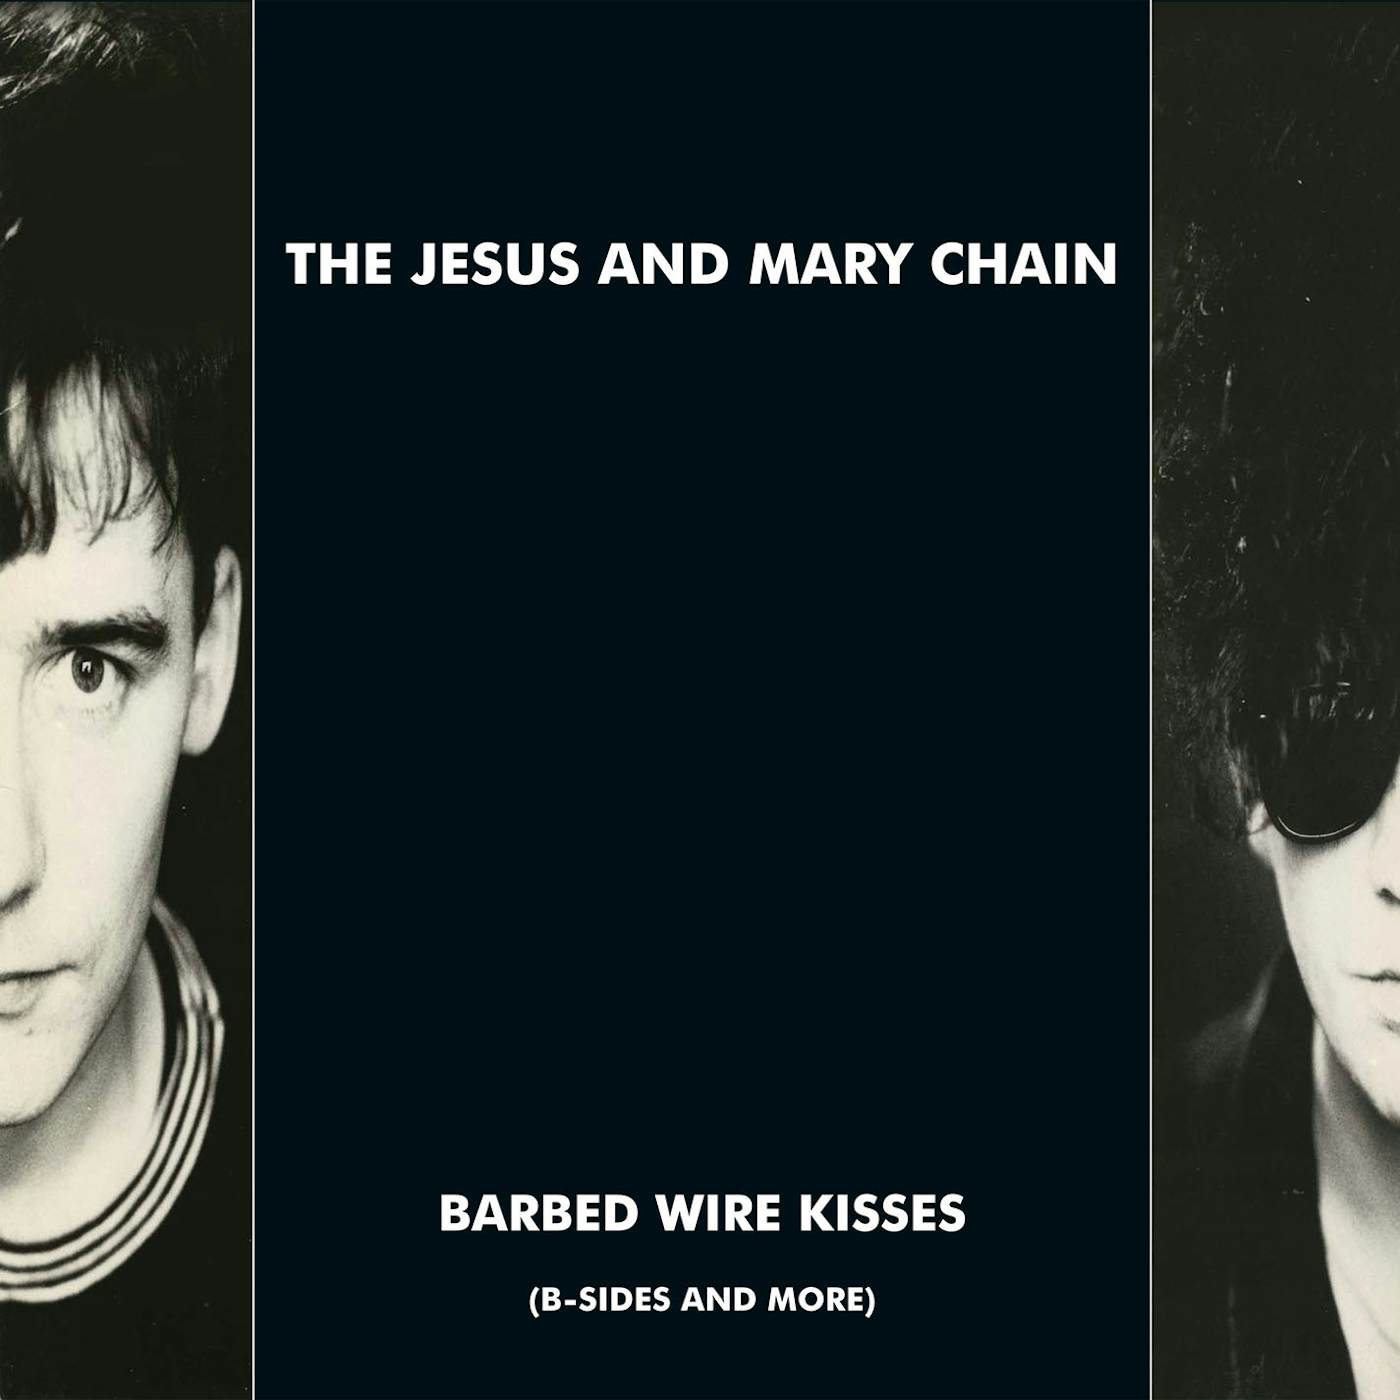 The Jesus and Mary Chain BARBED WIRE KISSES Vinyl Record - 180 Gram Pressing